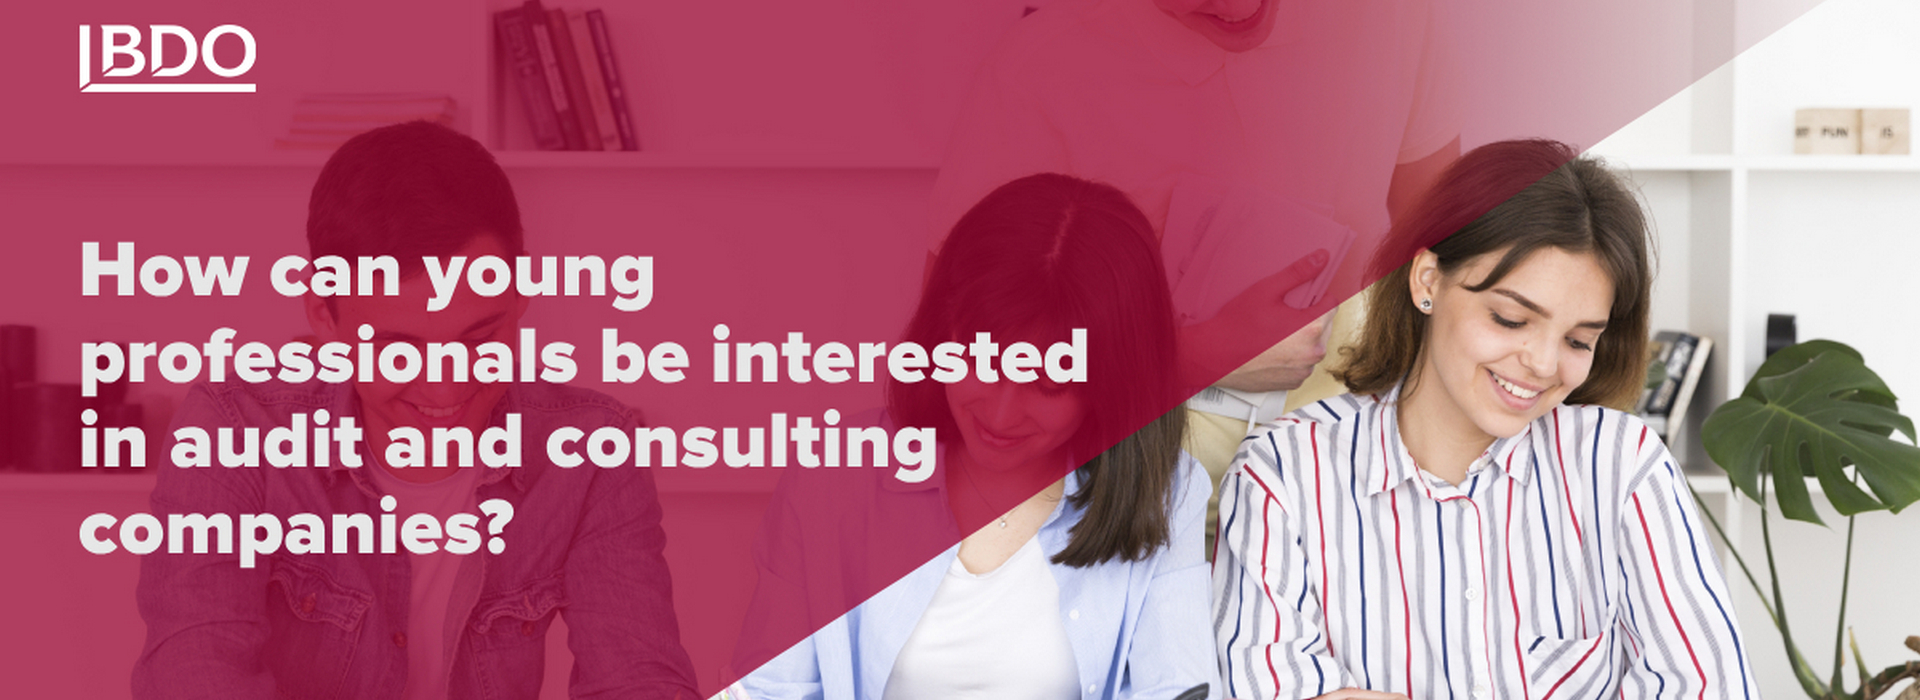 BDO in Ukraine: How Can Young Professionals Be Interested in Audit and Consulting Companies?